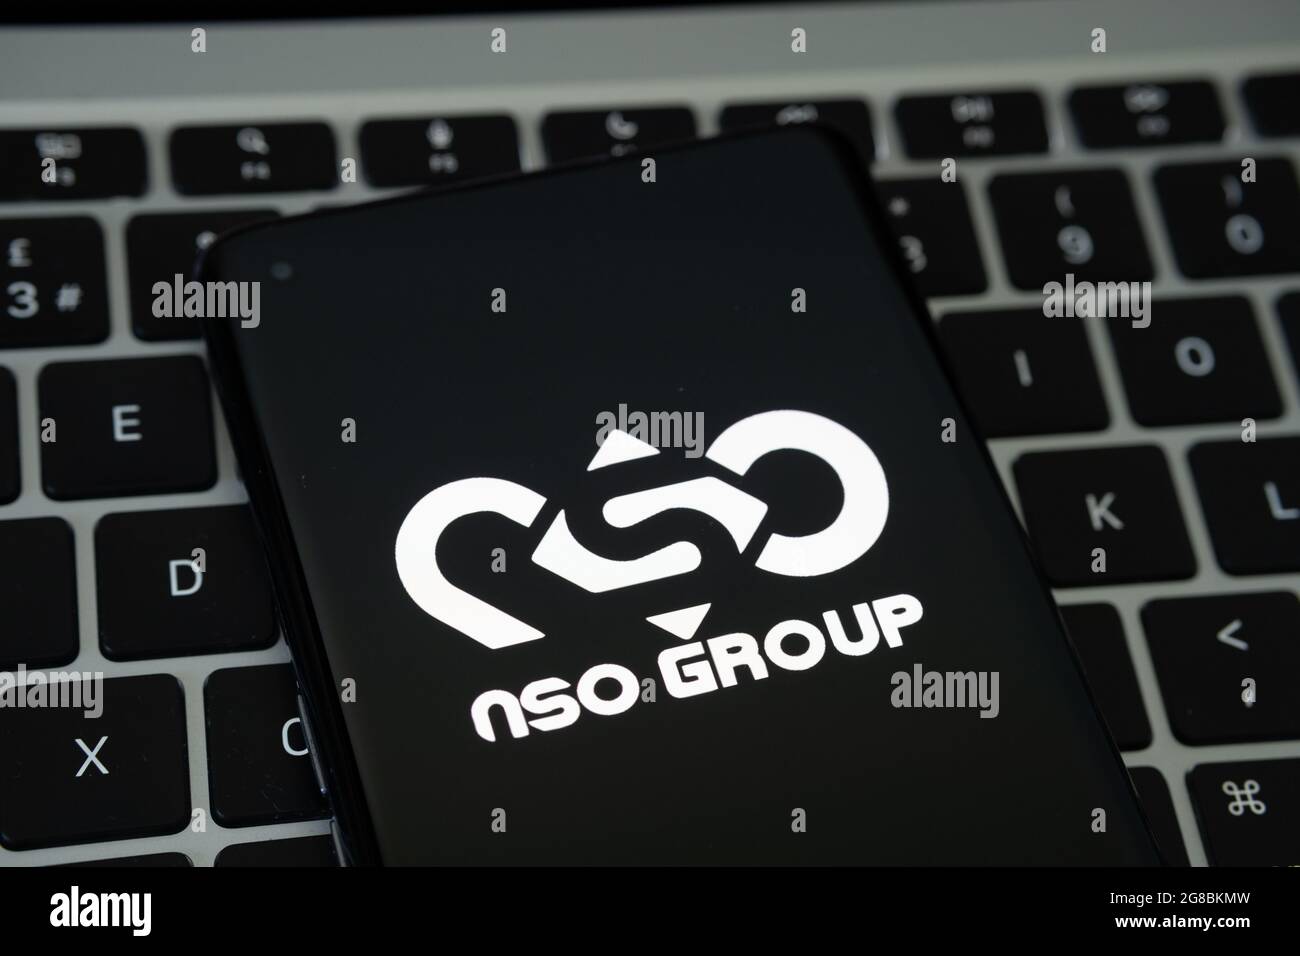 NSO Group logo seen on the smartphone placed on laptop keyboard. Israeli company known for its spyware called Pegasus. Selective focus. Stafford, UK Stock Photo